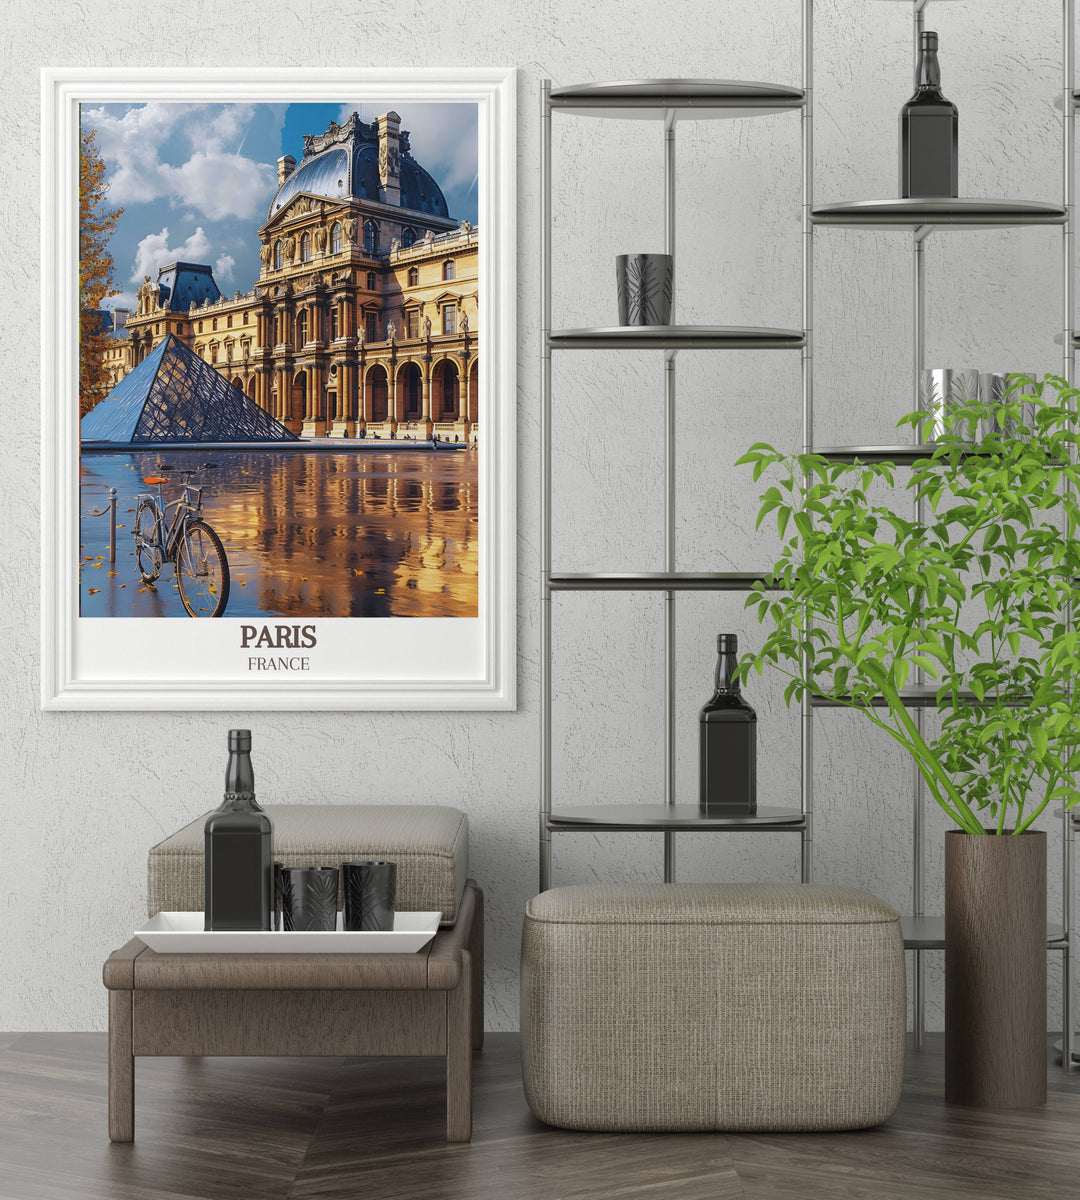 Vintage inspired prints of Parisian scenes, evoking a sense of nostalgia and romance, ideal for those who appreciate the timeless allure of the City of Love.